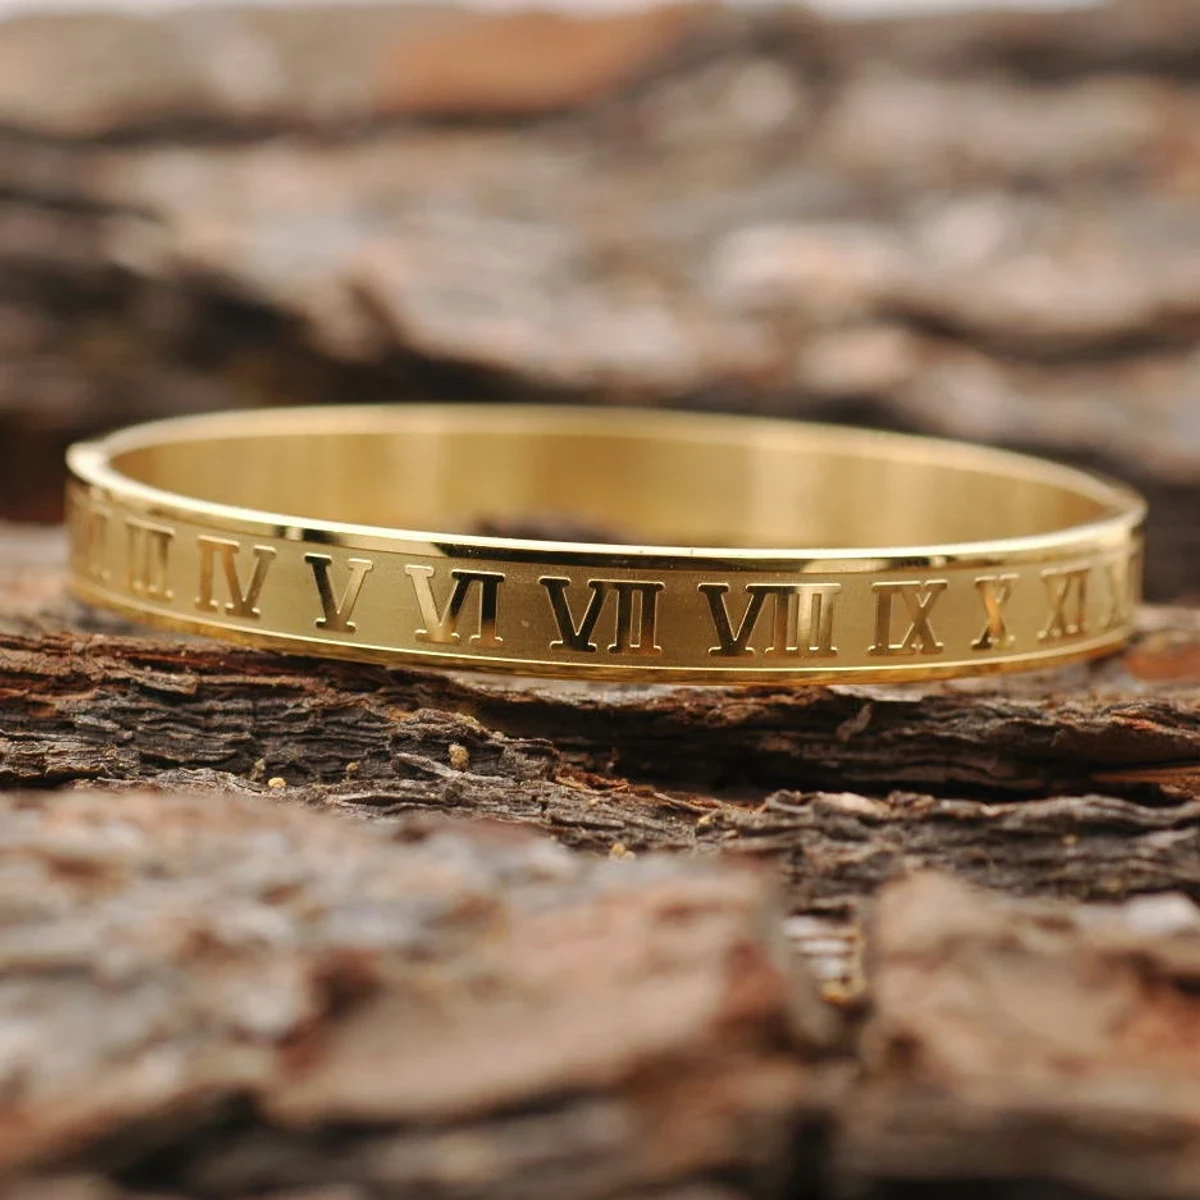 Roman Numeral High Quality Stainless Steel Bangles for Men